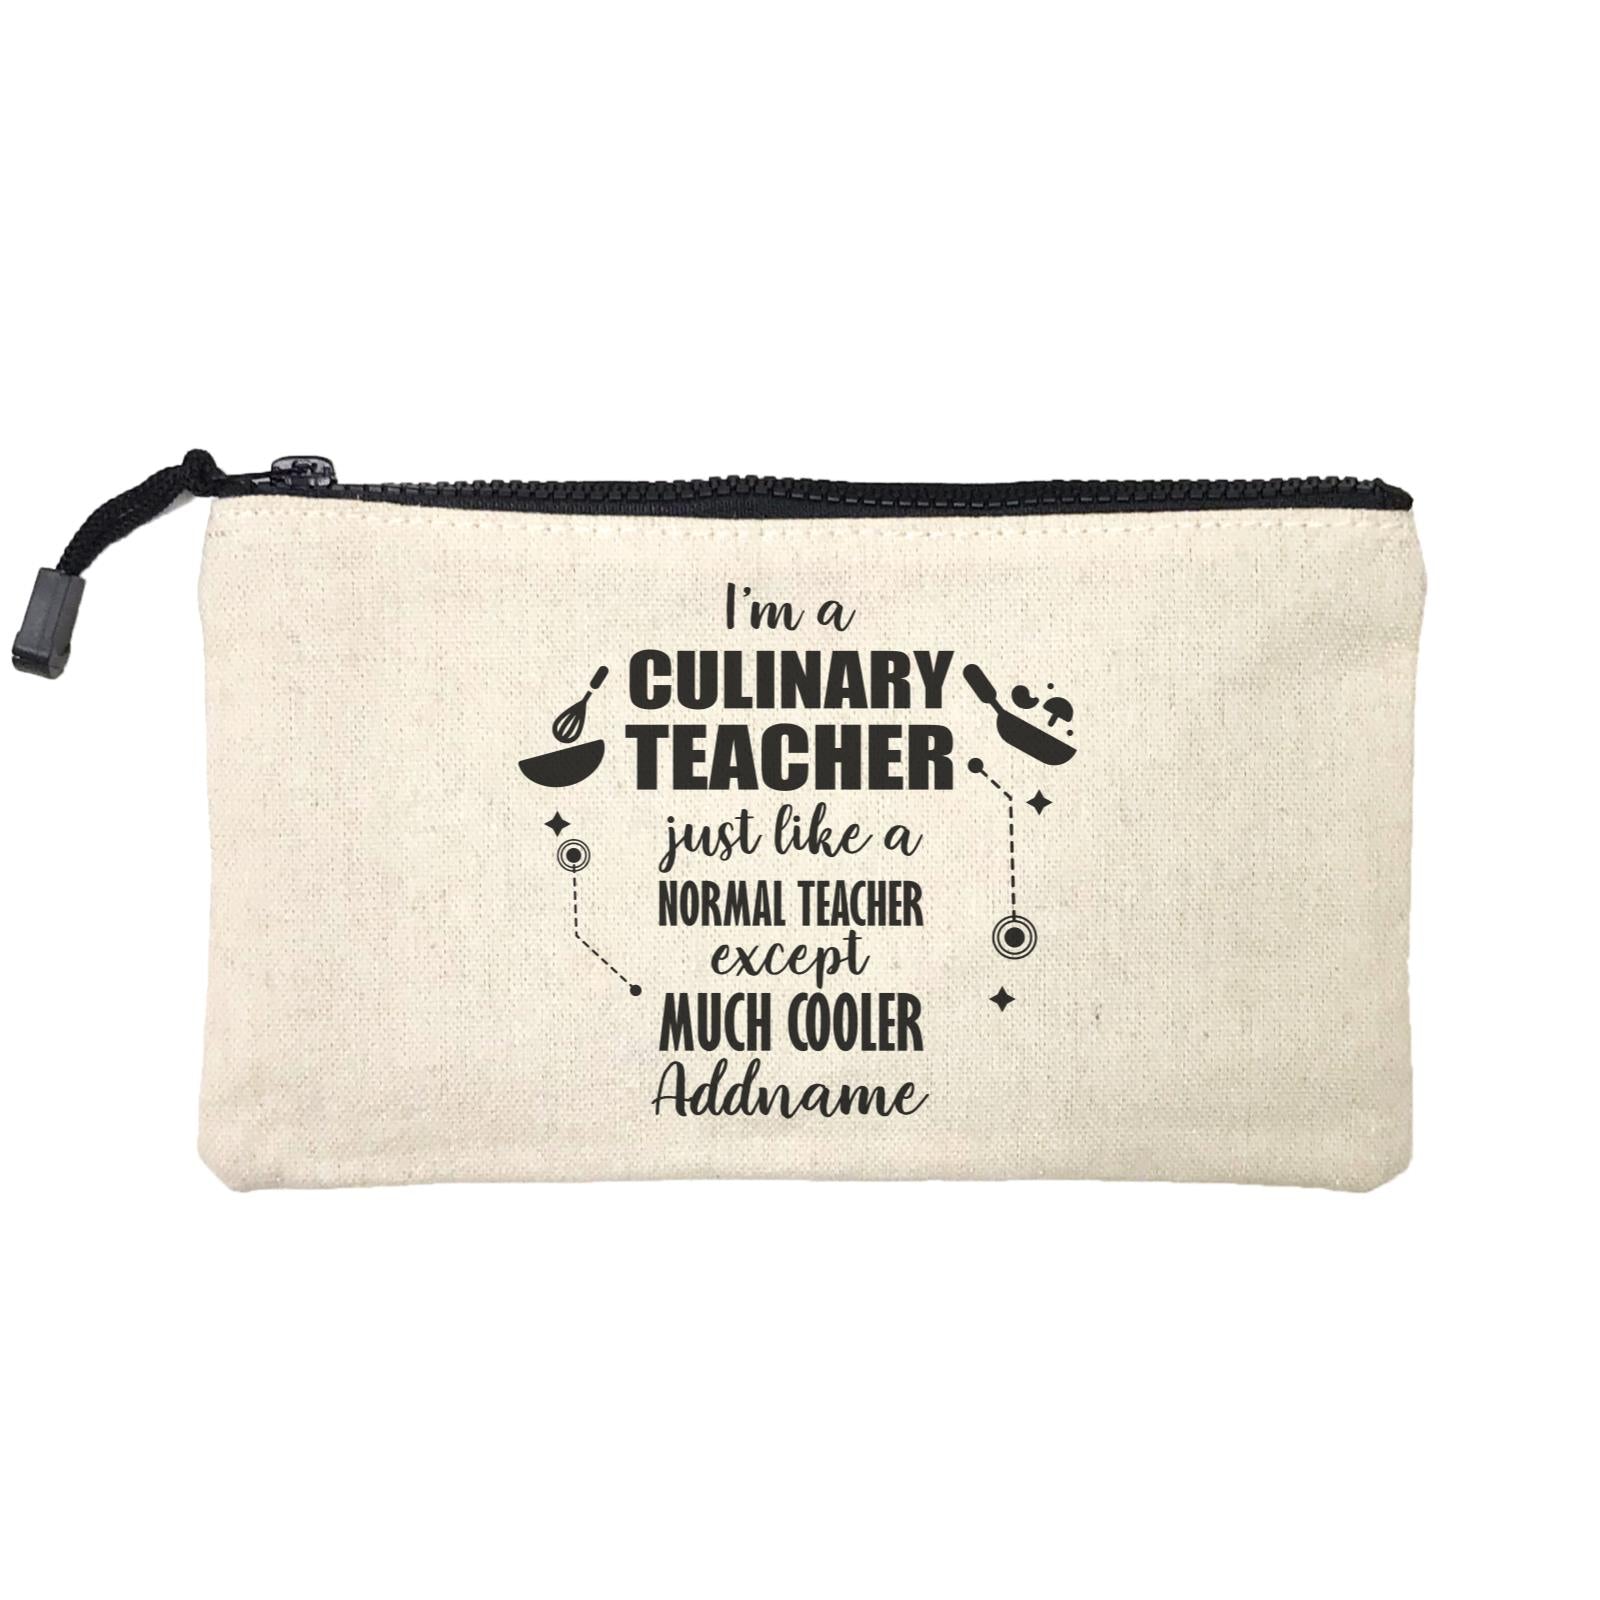 Subject Teachers I'm A Culinary Teacher Addname Mini Accessories Stationery Pouch